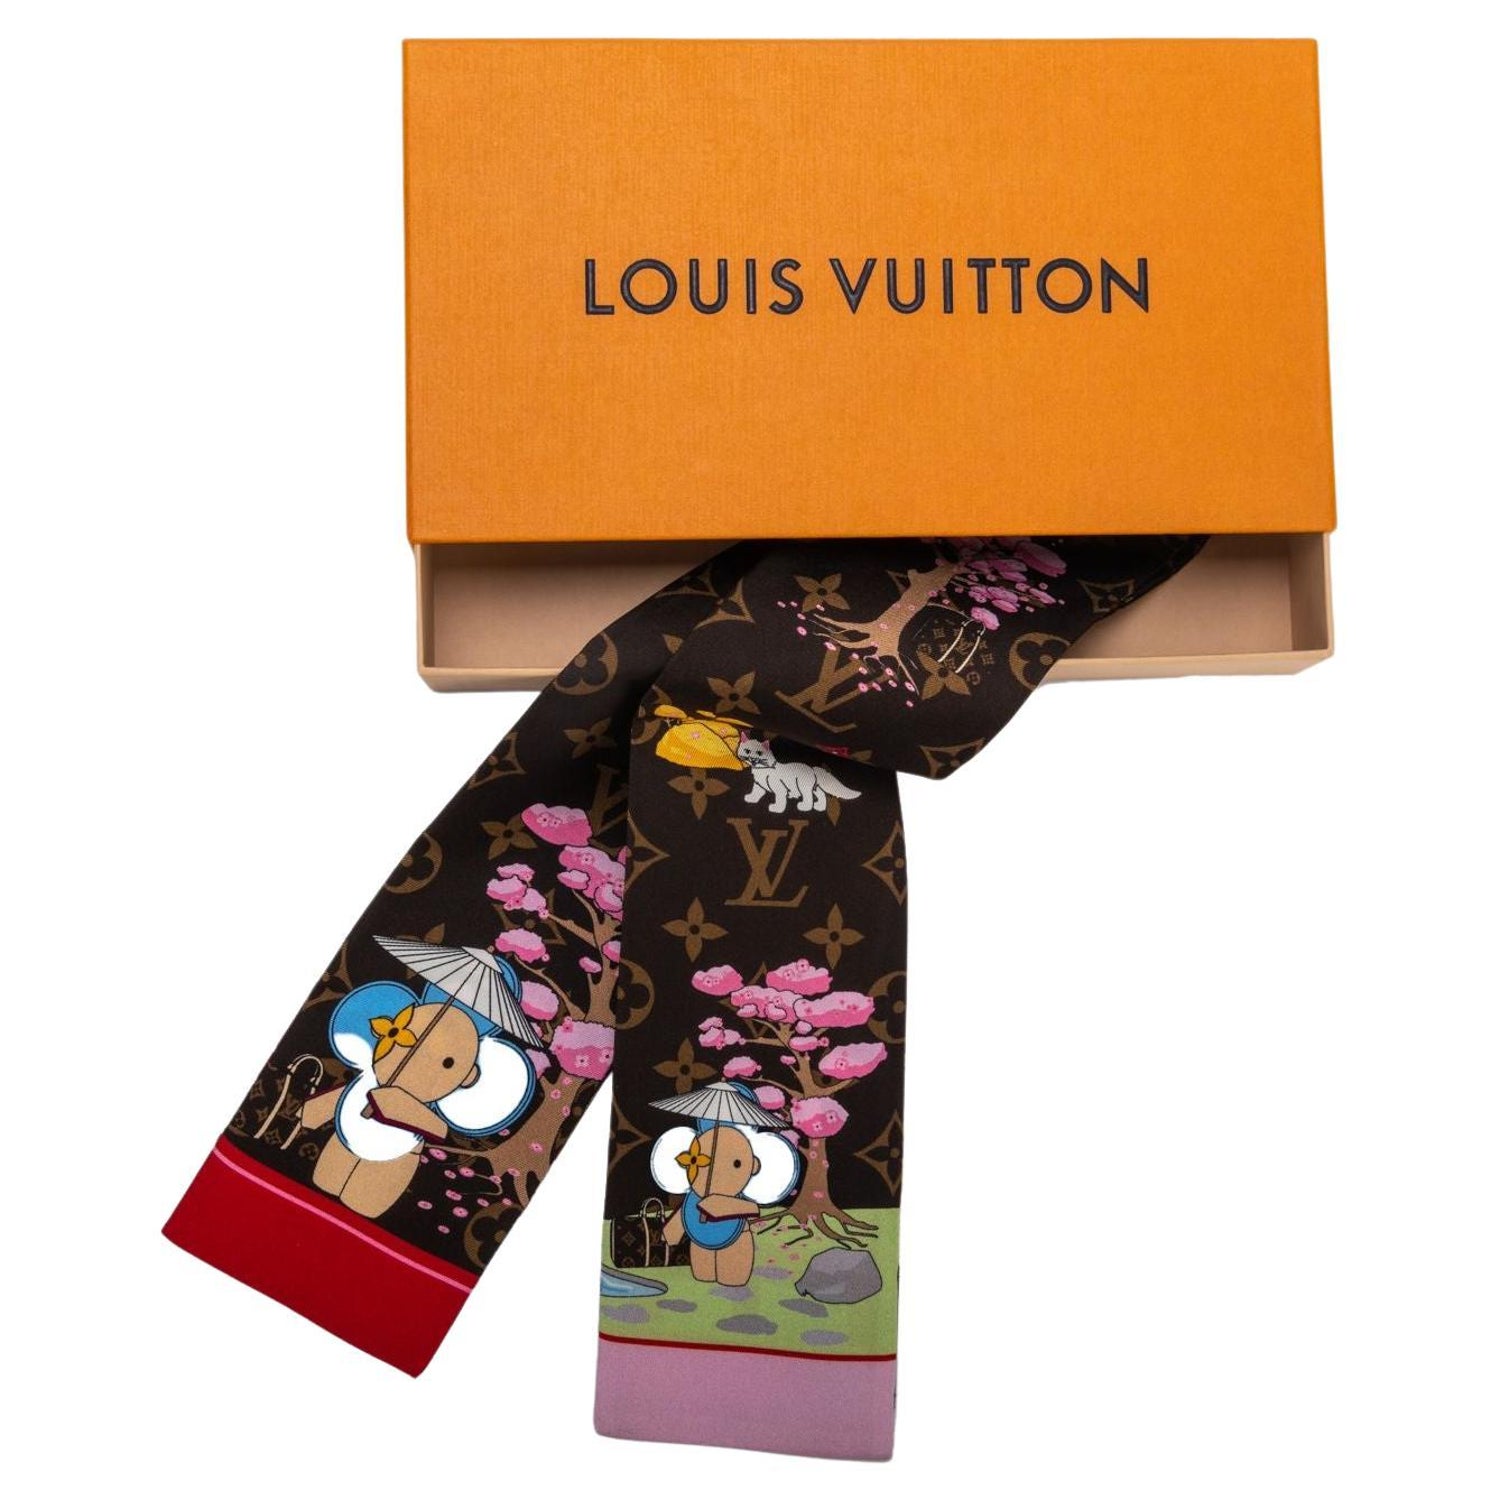 Sold at Auction: LOUIS VUITTON Twilly MONOGRAM CONFIDENTIAL BANDEAU.